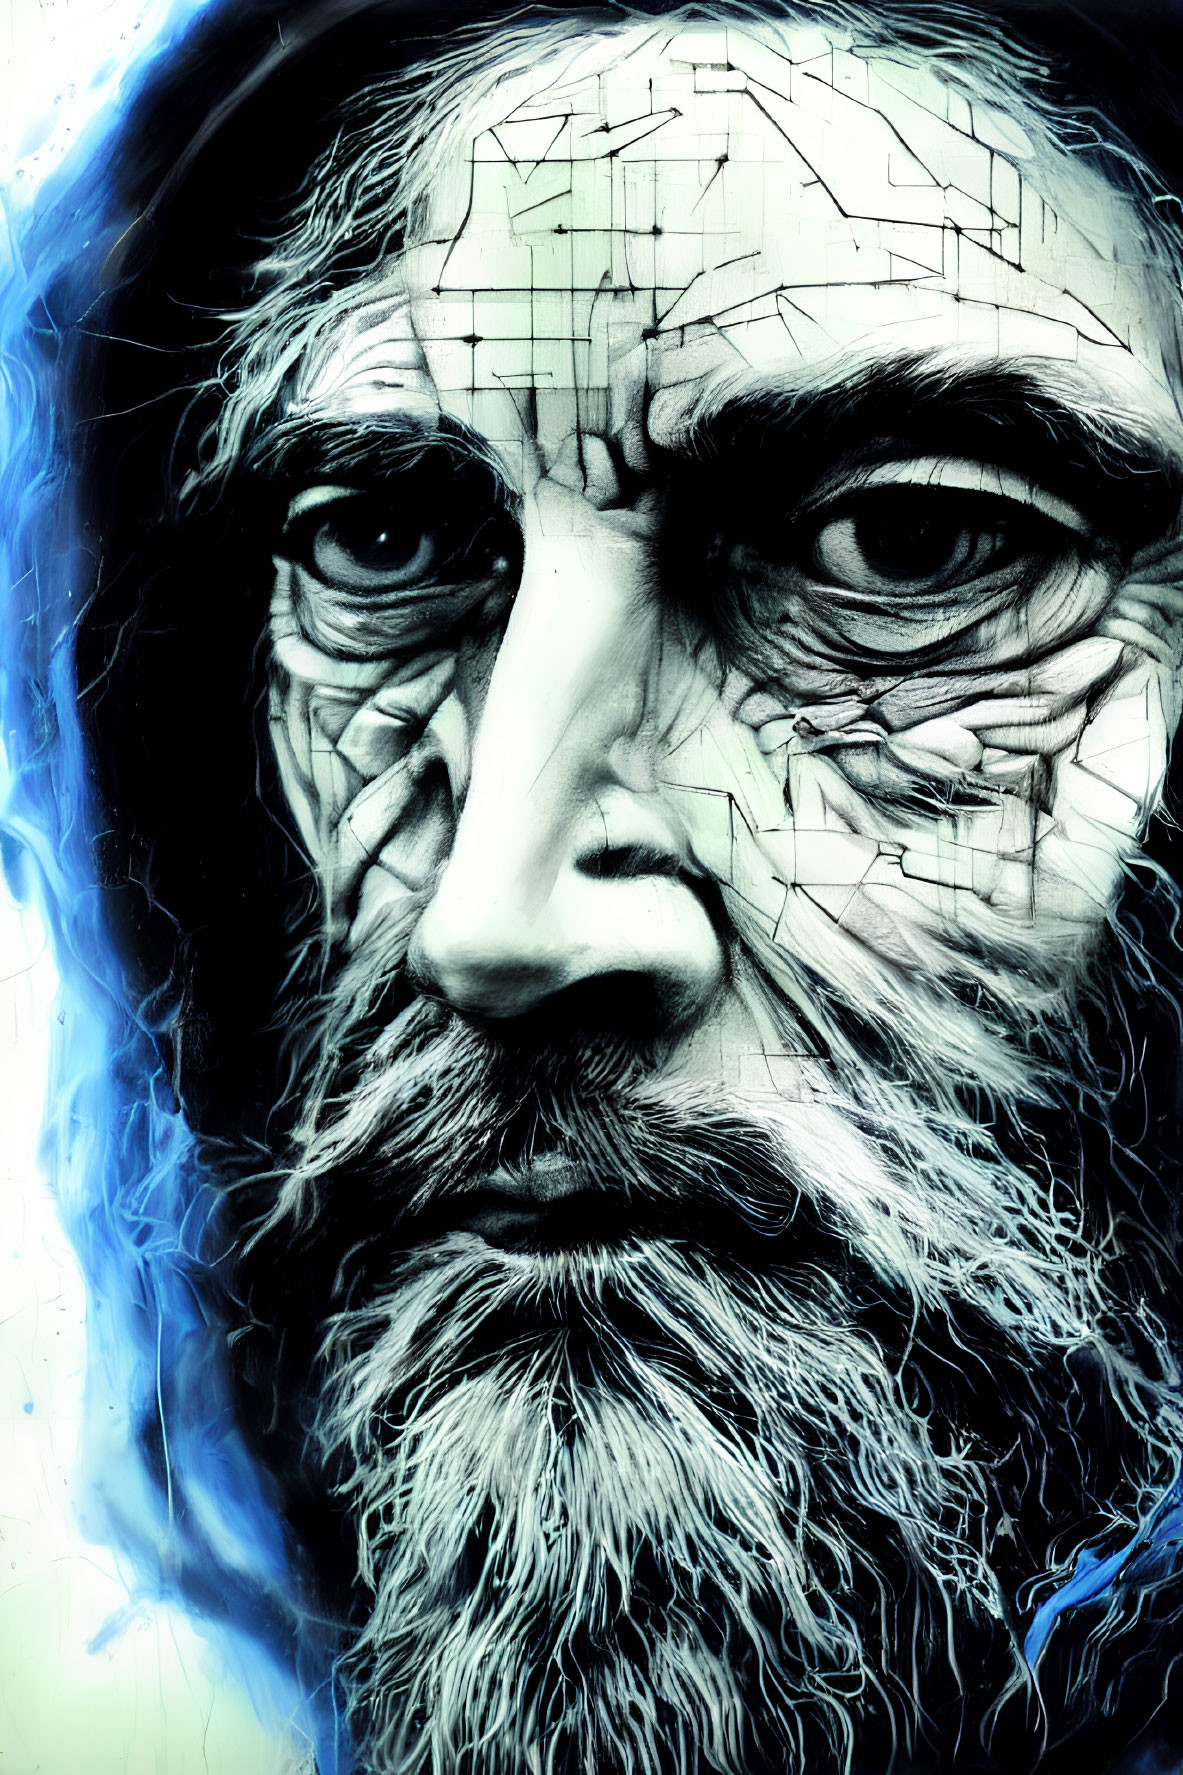 Bearded man with intense eyes, cracked skin effect, blue-white color palette